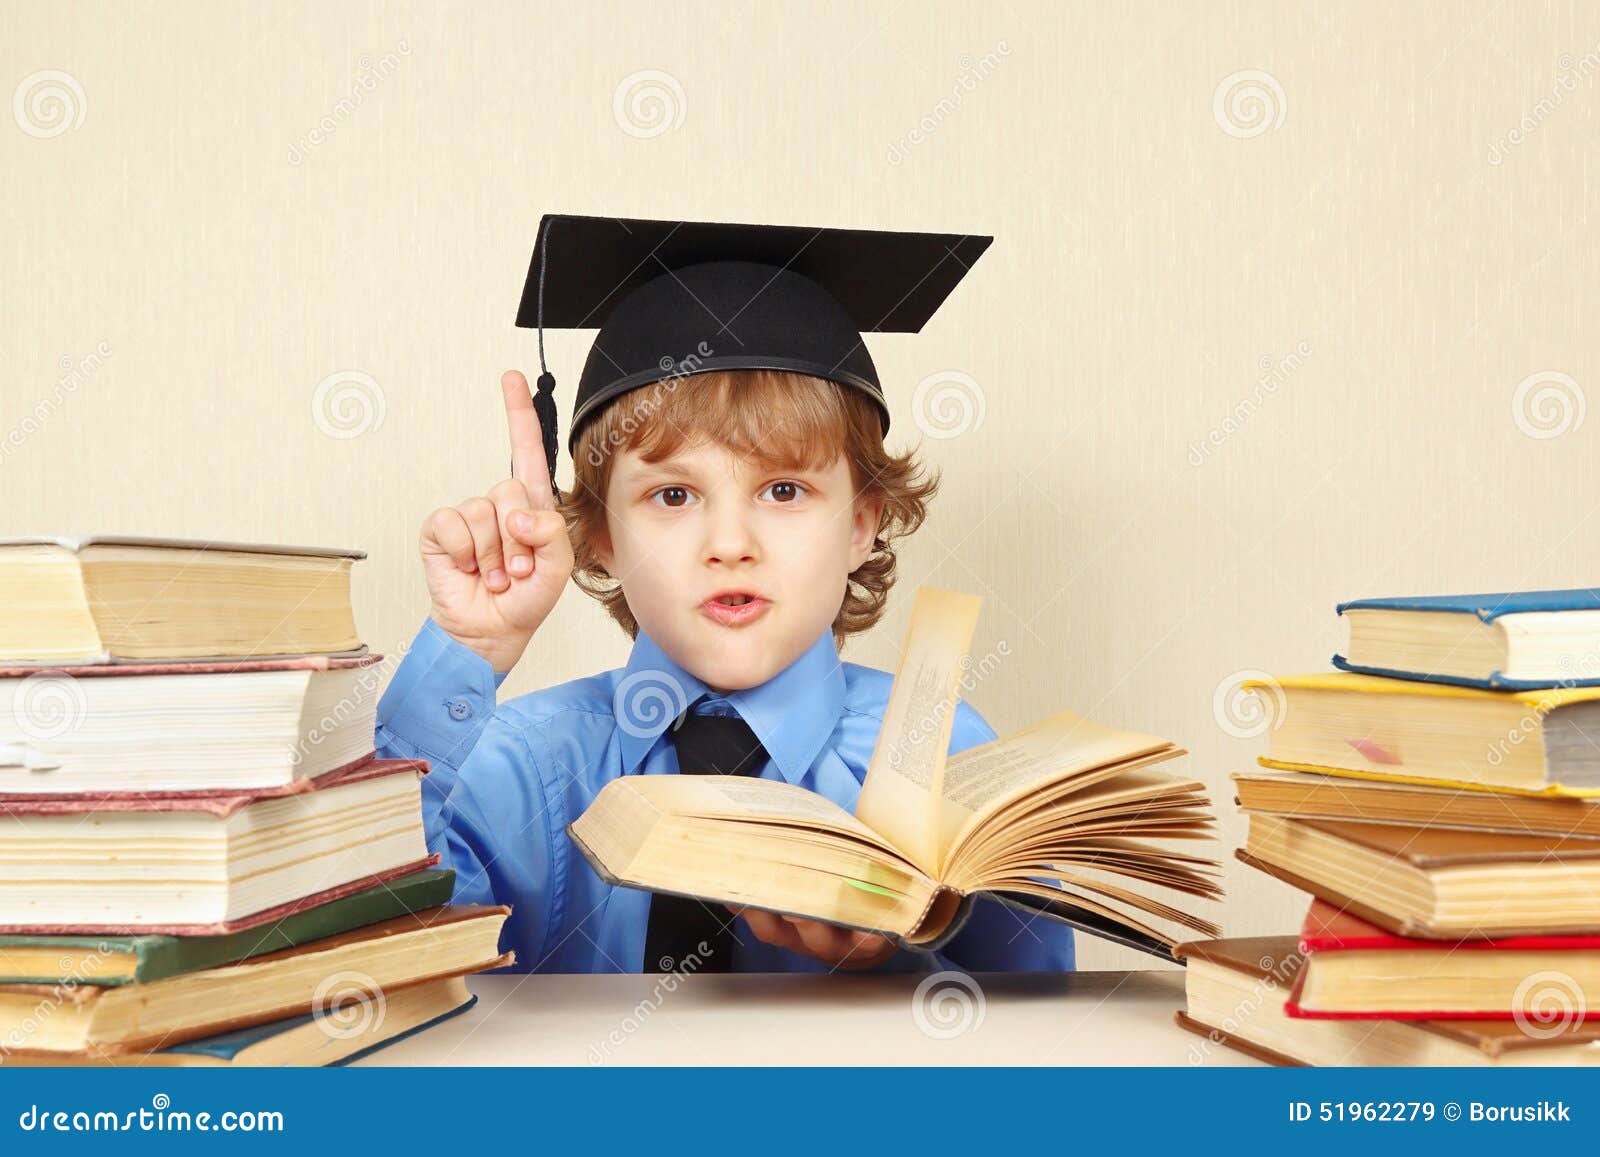 little boy in academic hat quoted old book